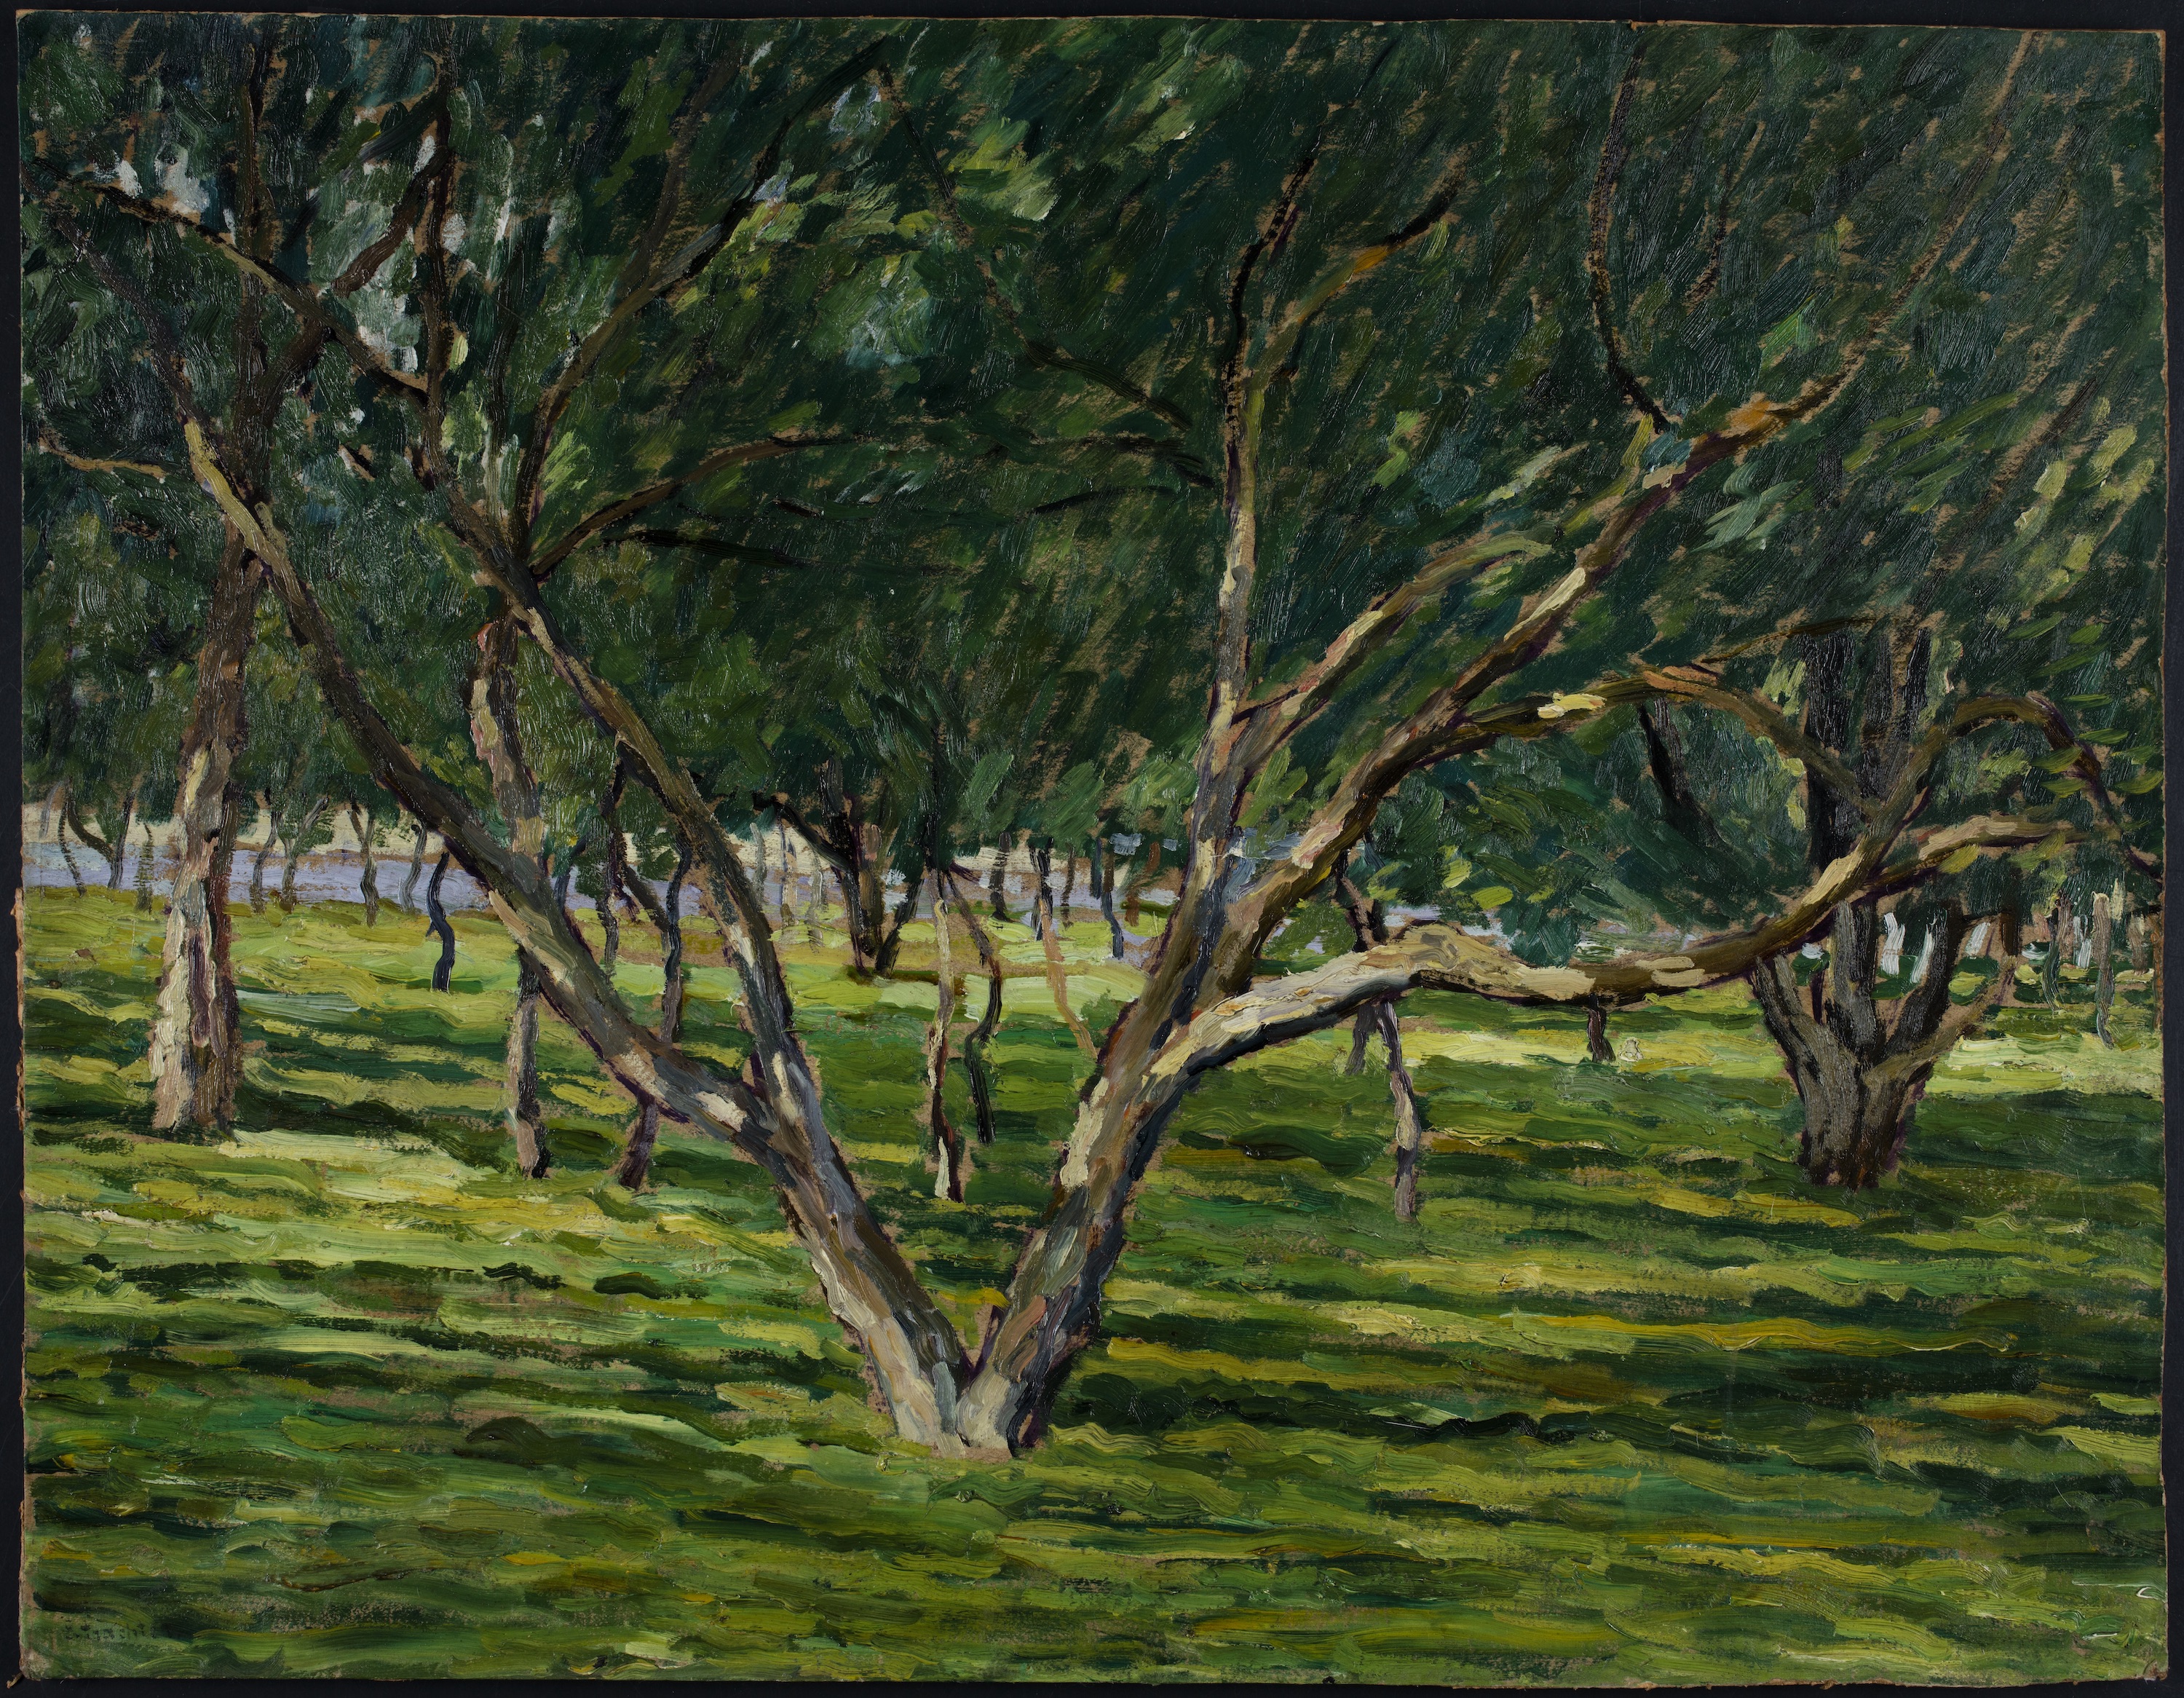 Orchard by Symche Trachter - c. 1928 - 57 x 73 cm Jewish Historical Institute